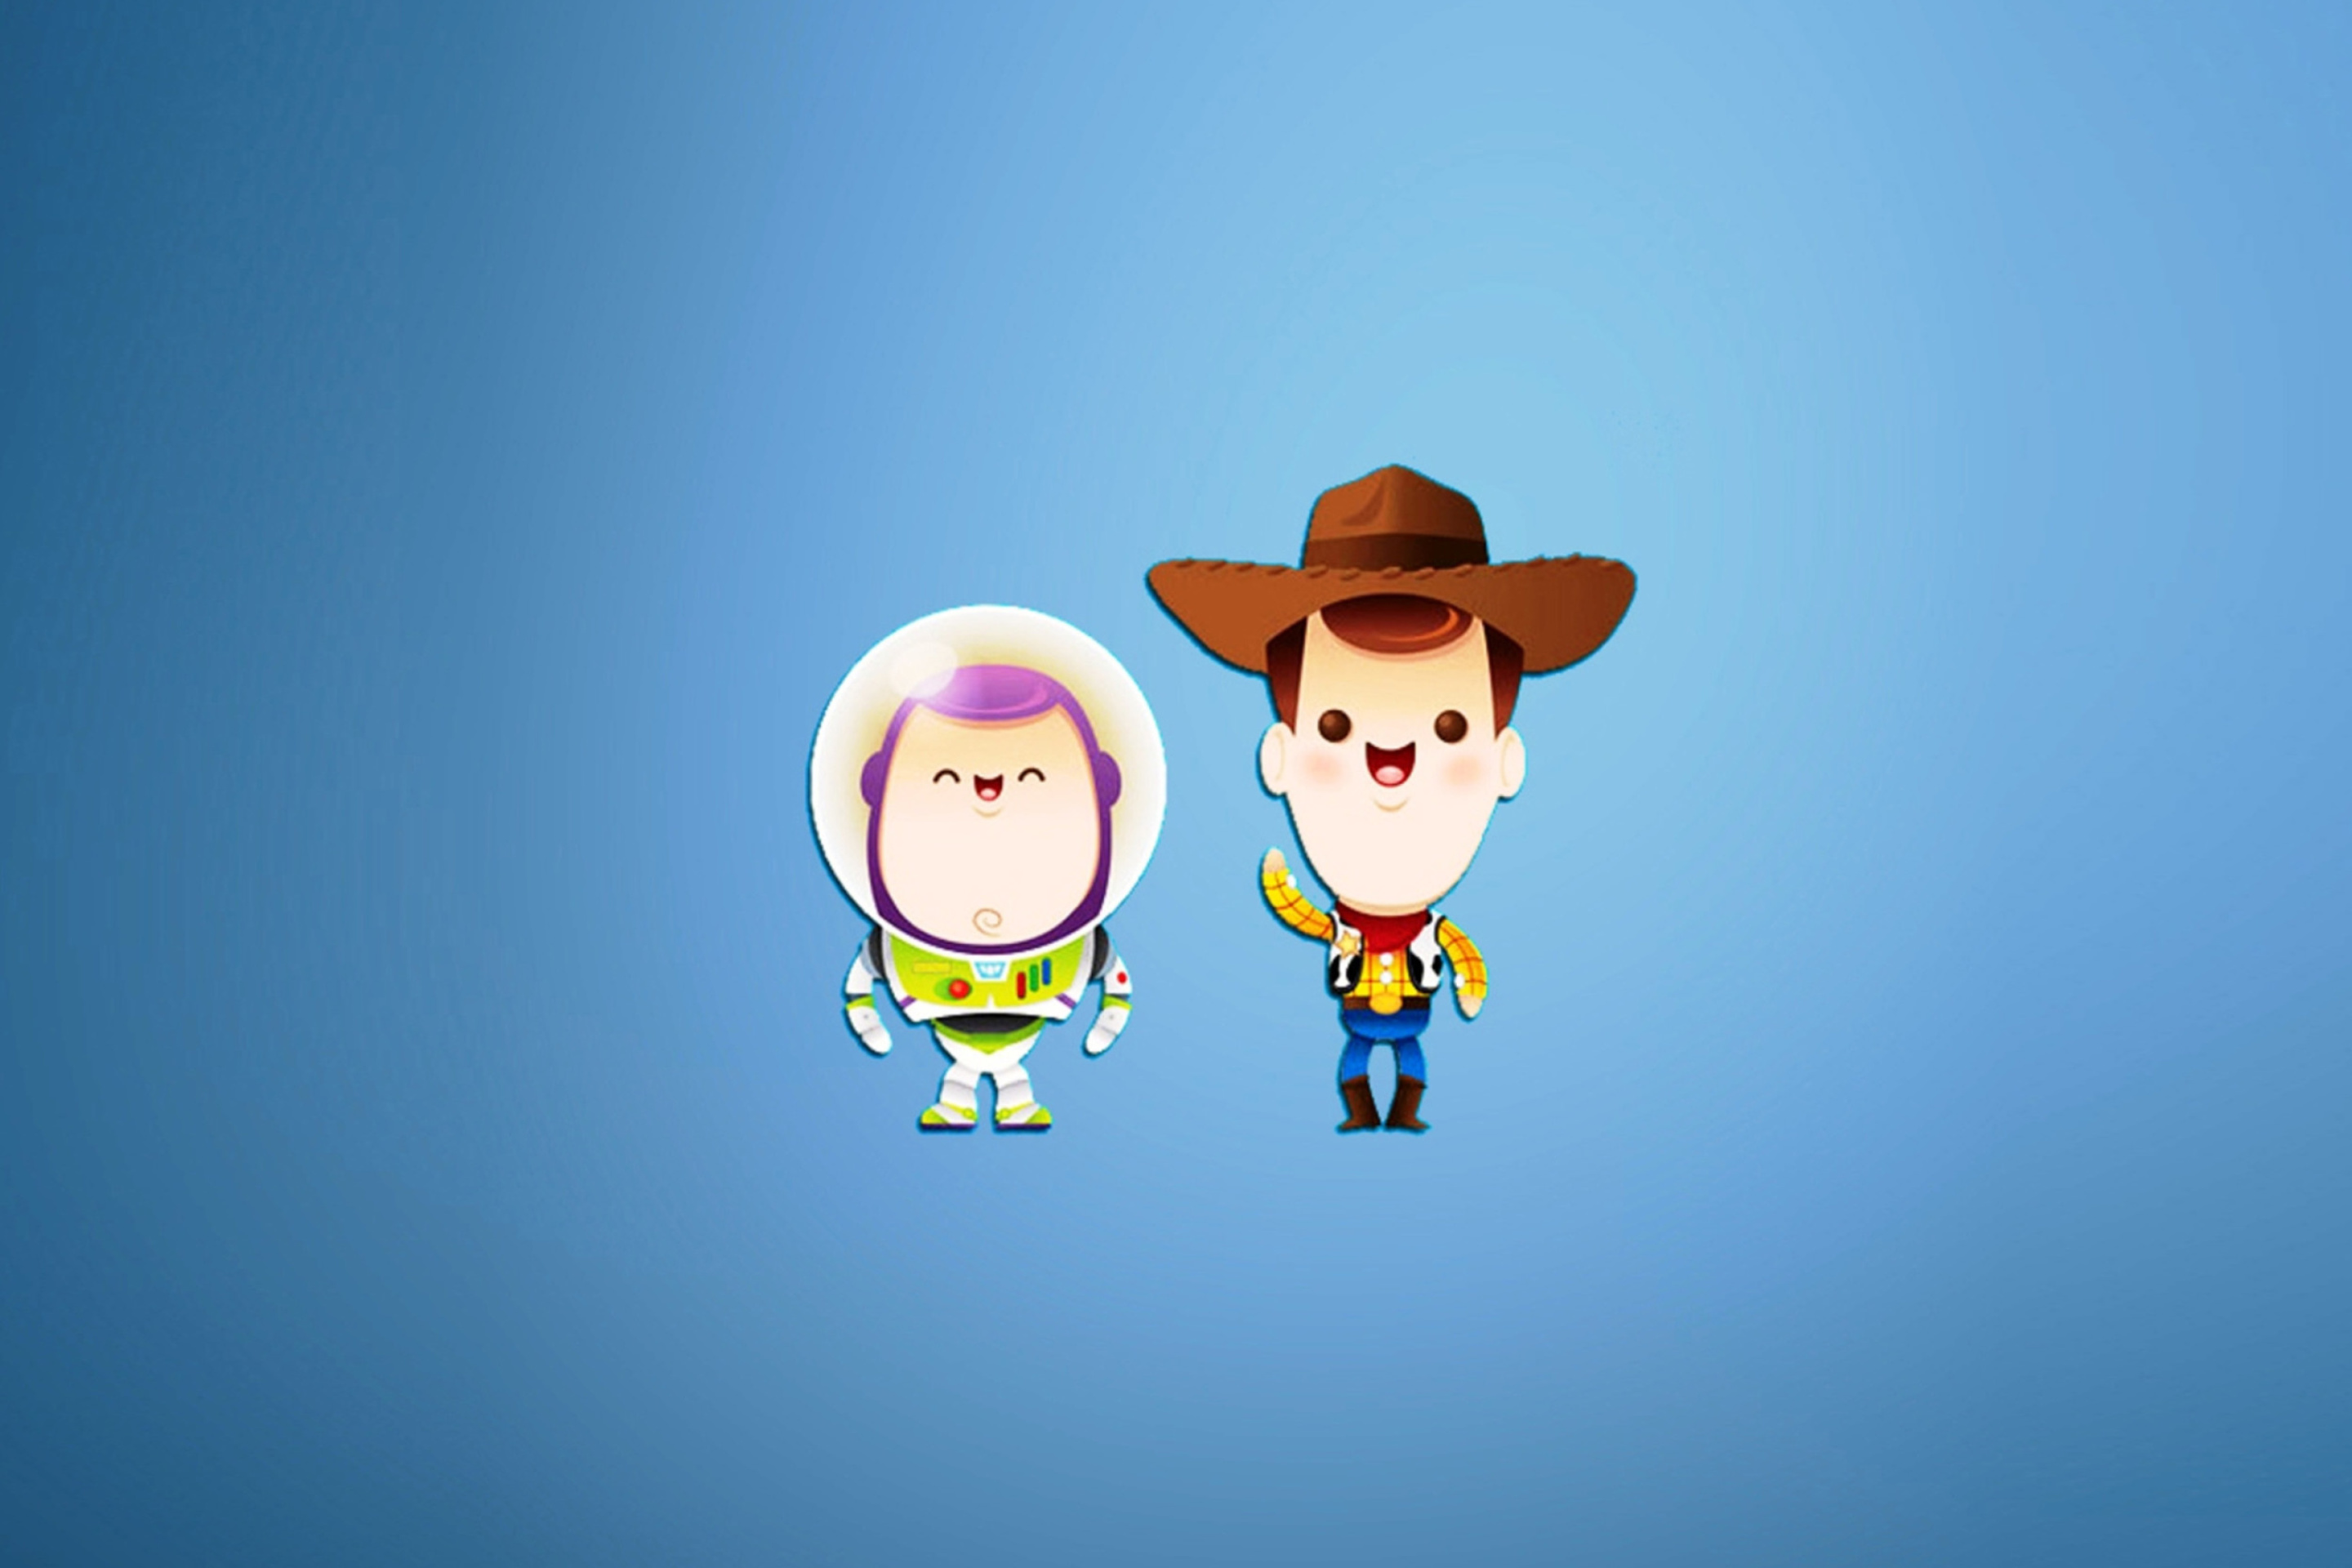 Das Buzz and Woody in Toy Story Wallpaper 2880x1920